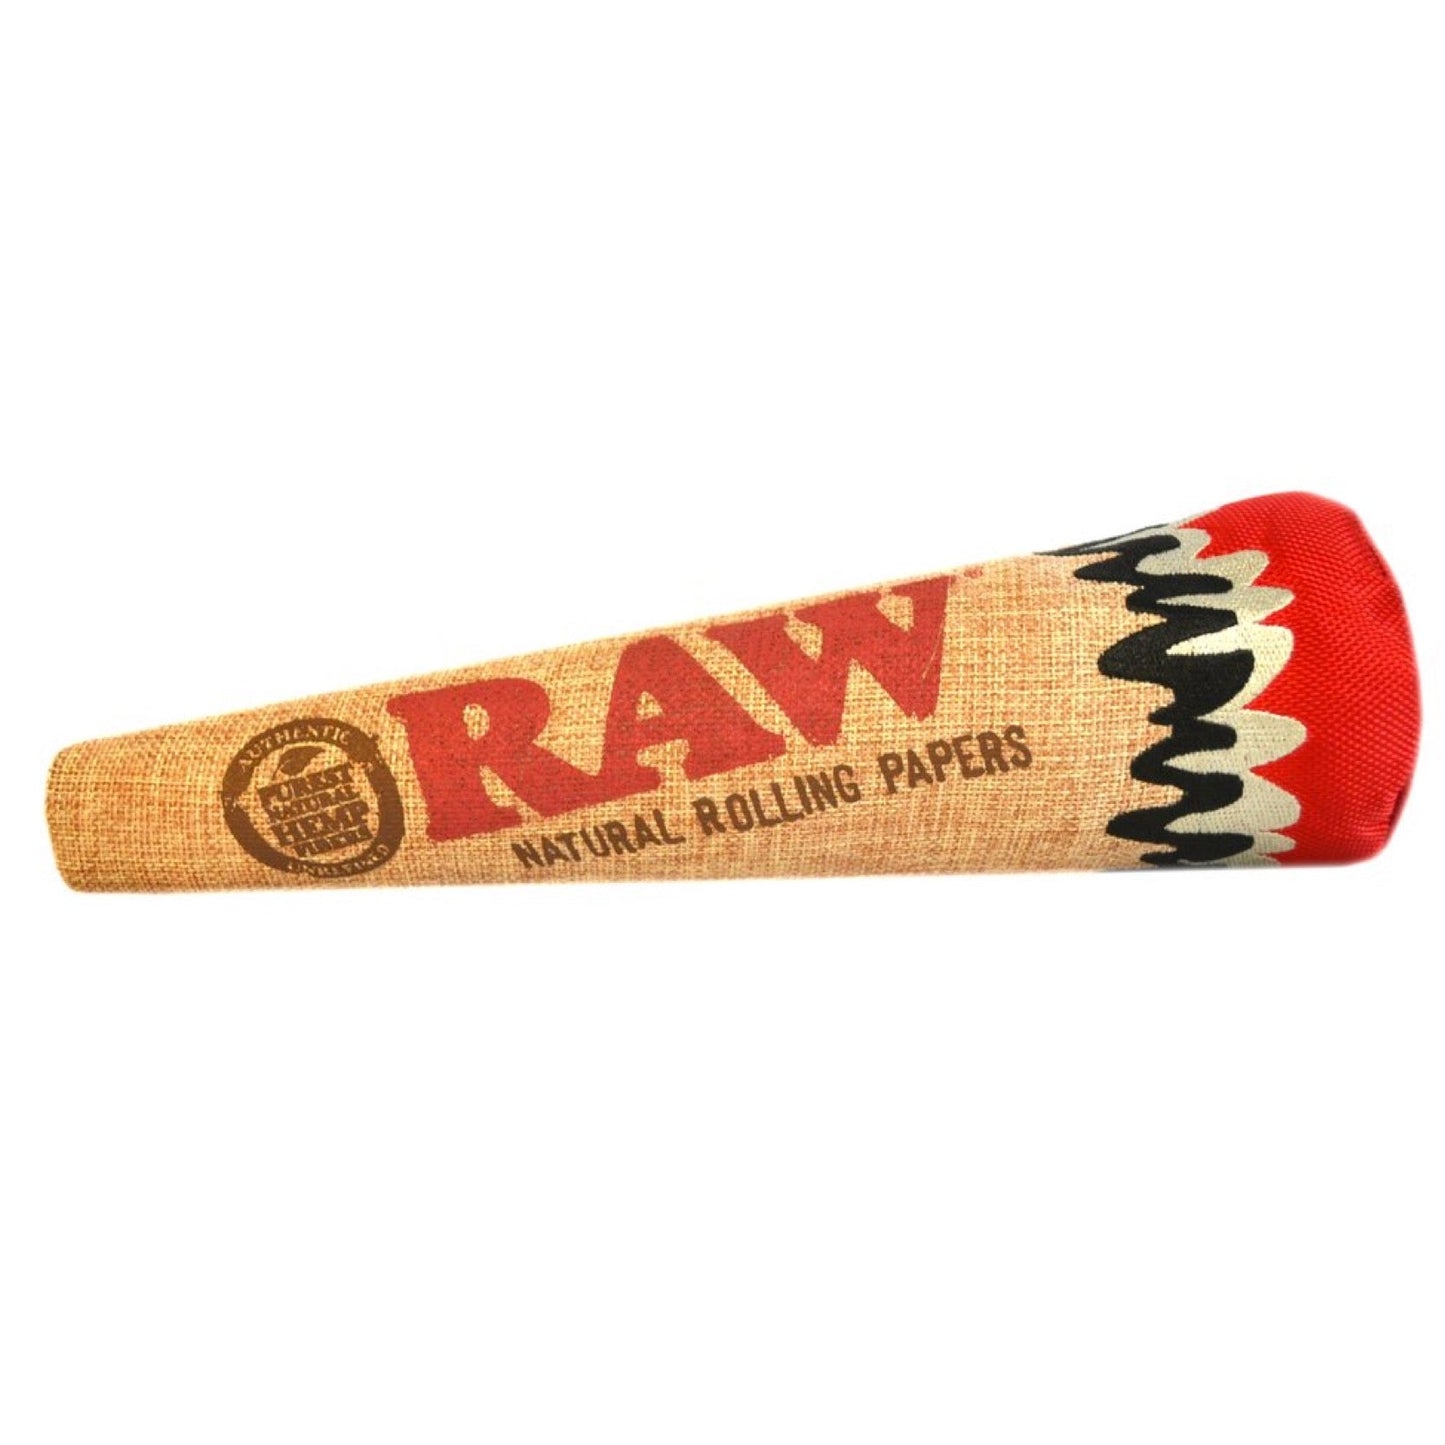 Raw® Rolling Papers Hemp Joint Dog Toy 🐶 by RAW Rolling Papers | Mission Dispensary